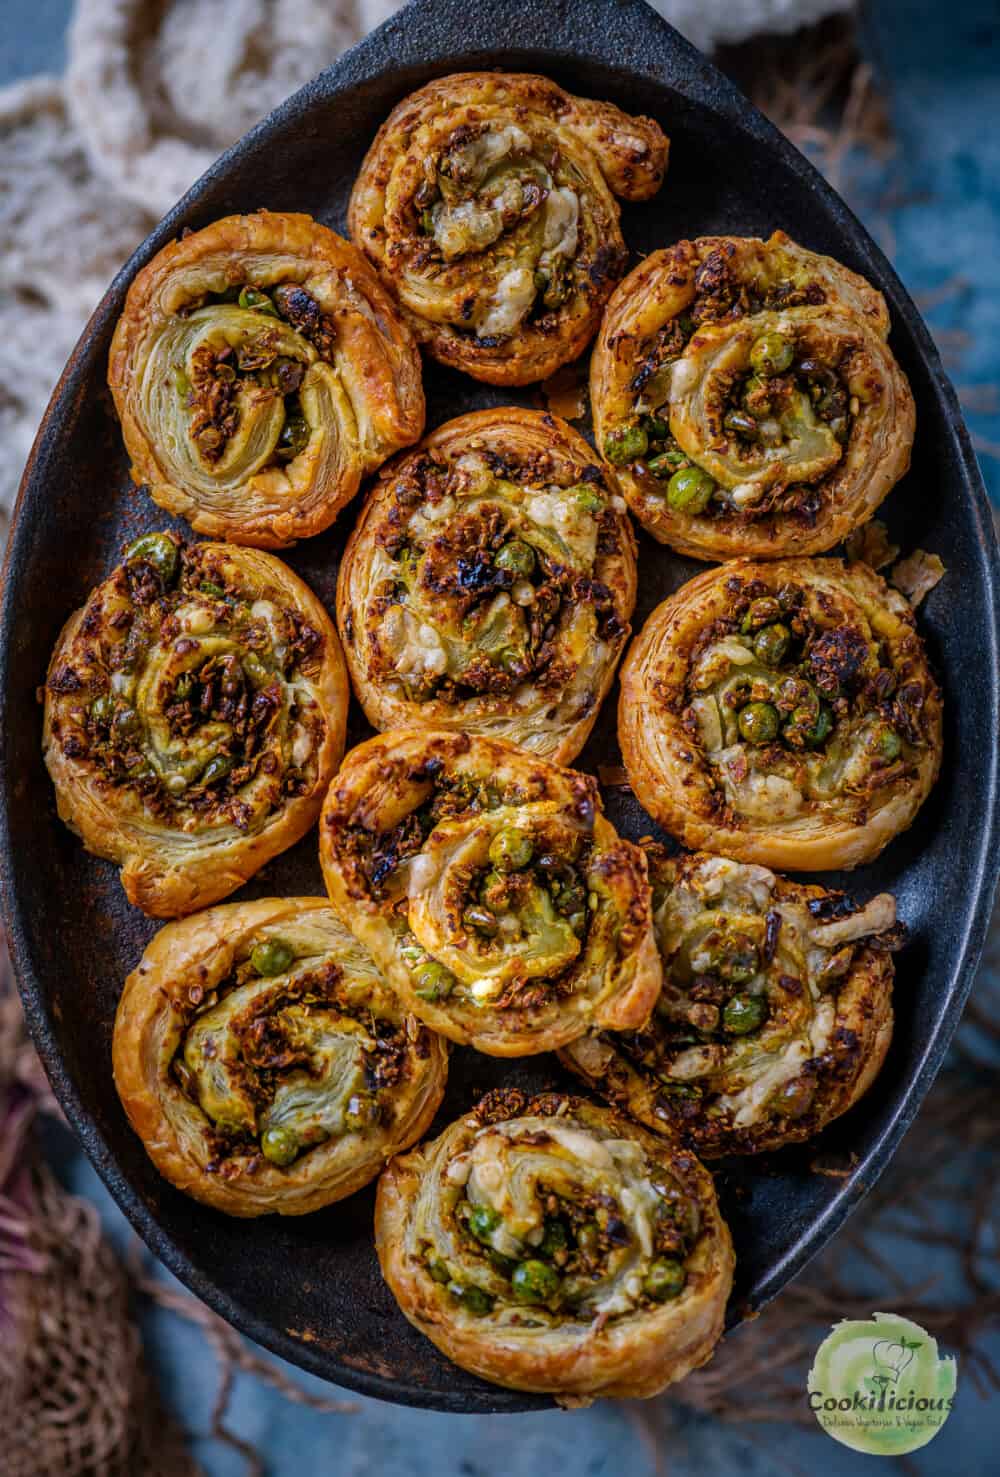 Puff Pastry Pinwheels With Matar Kachori Filling served in a platter.